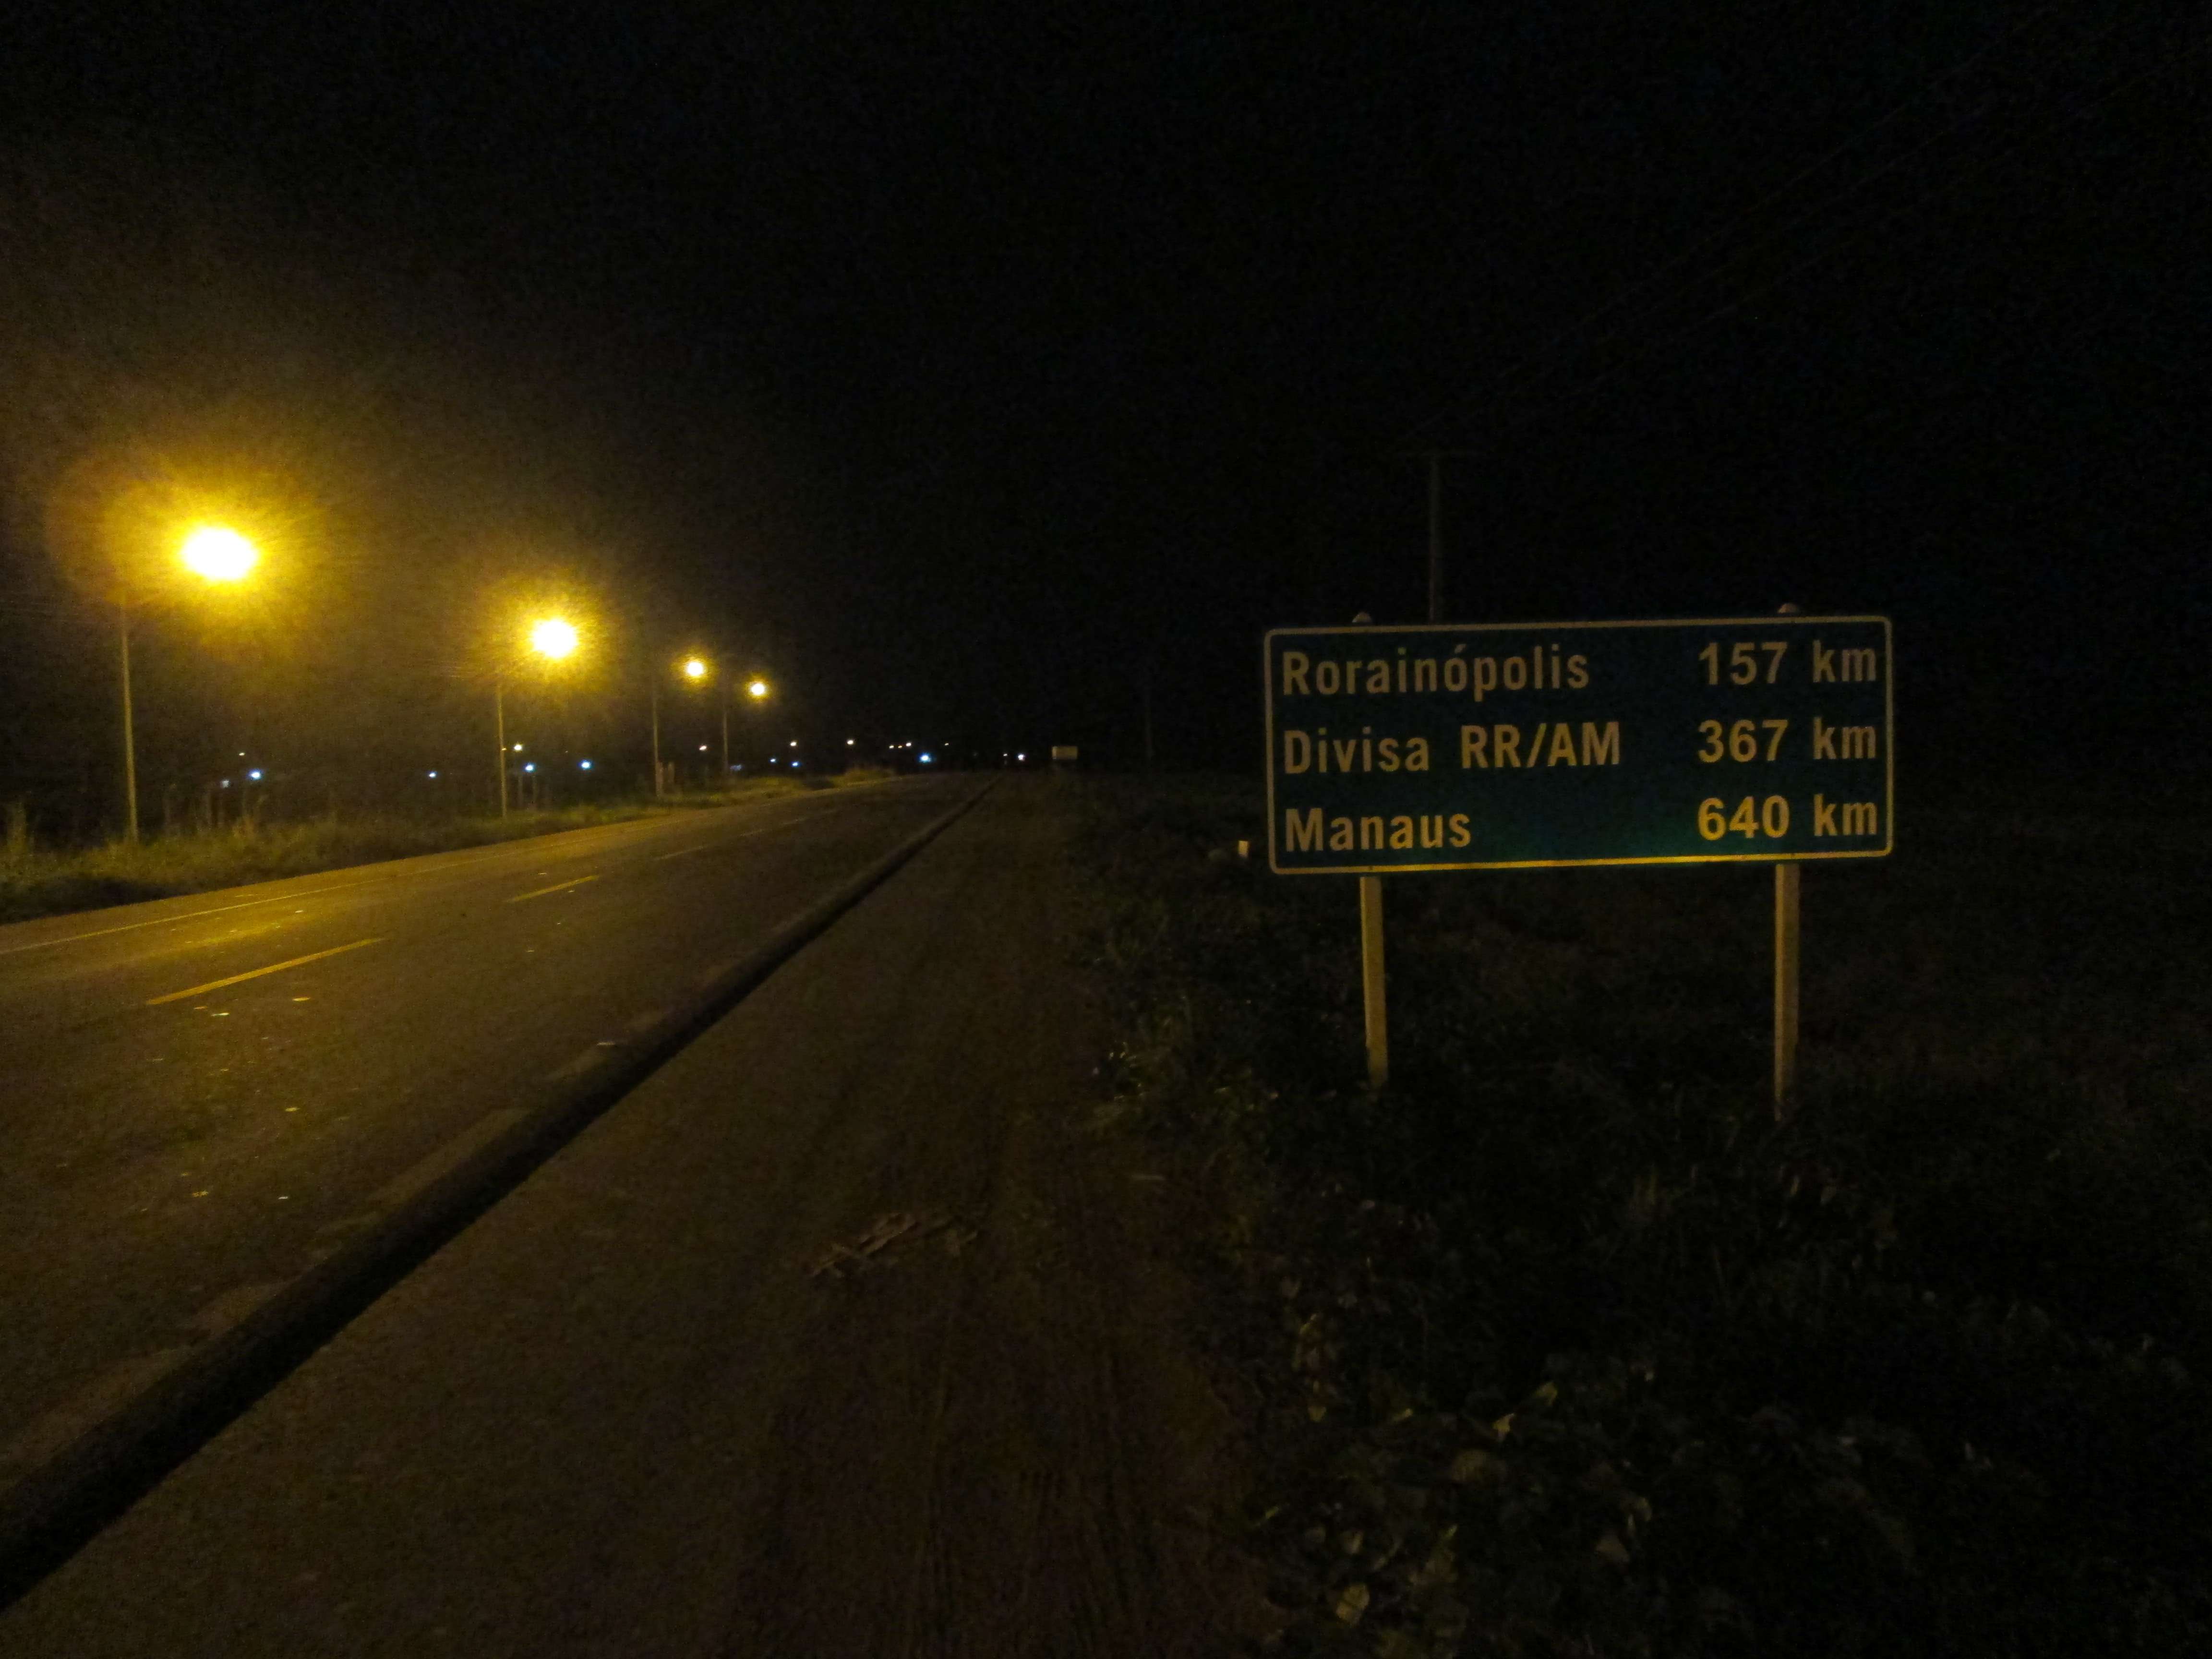 A photo of a sign at night: Manaus is 640km